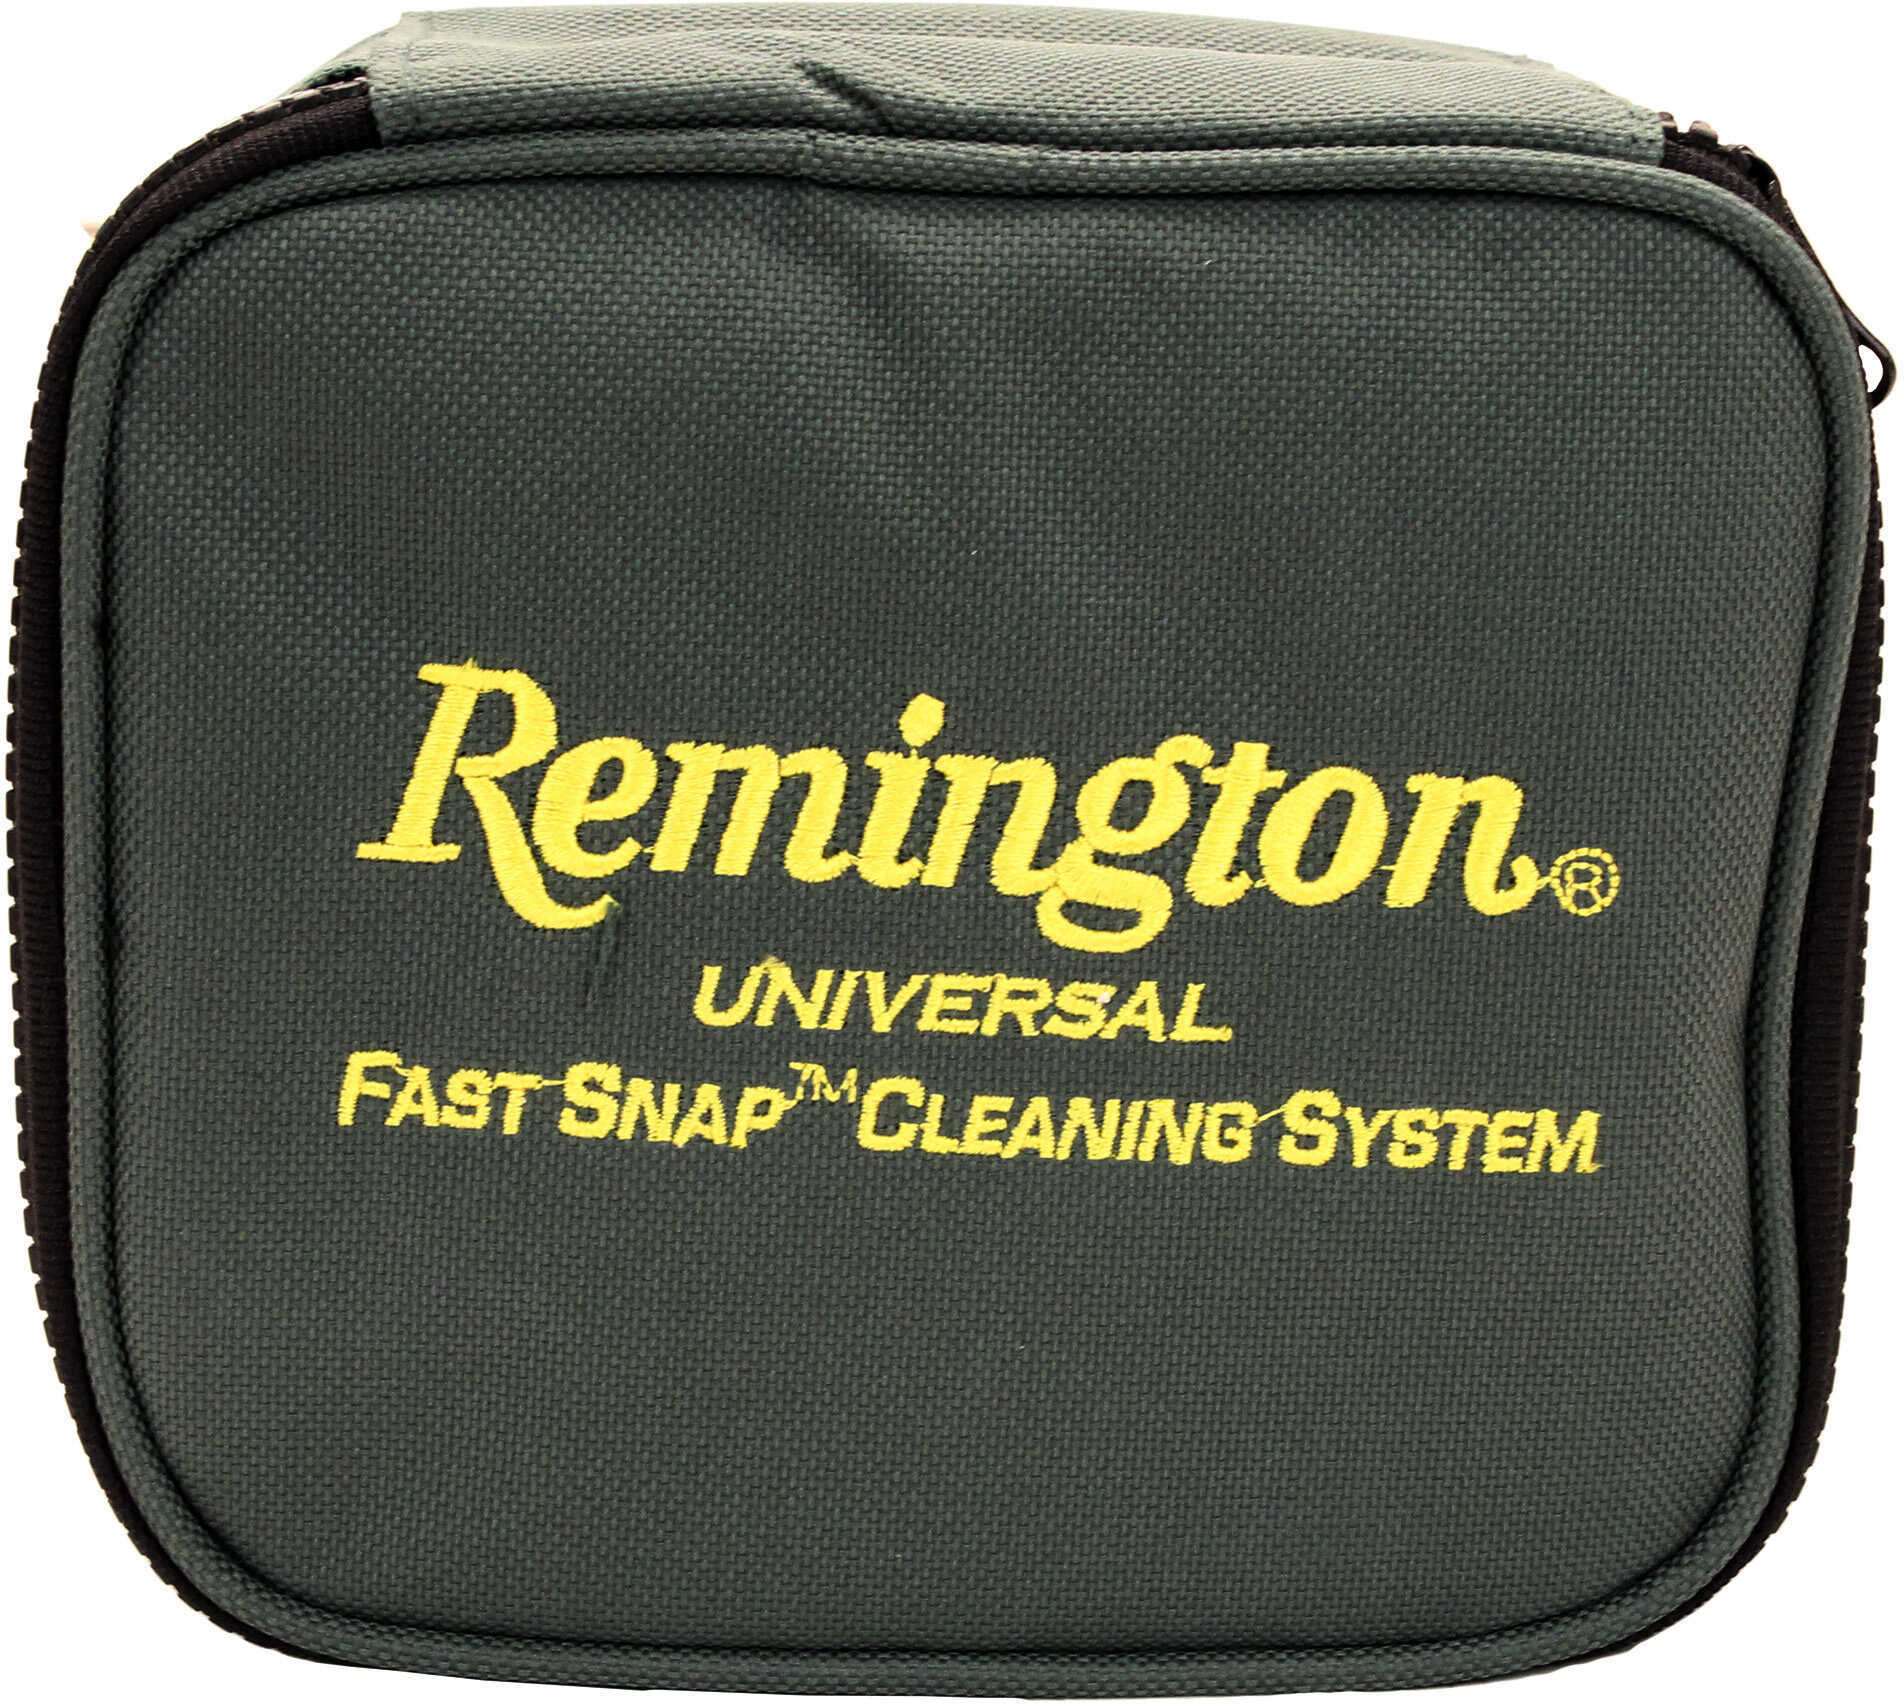 Remington Accessories 16364 Fast Snap 2.0 Universal Cleaning Kit 38 Pieces